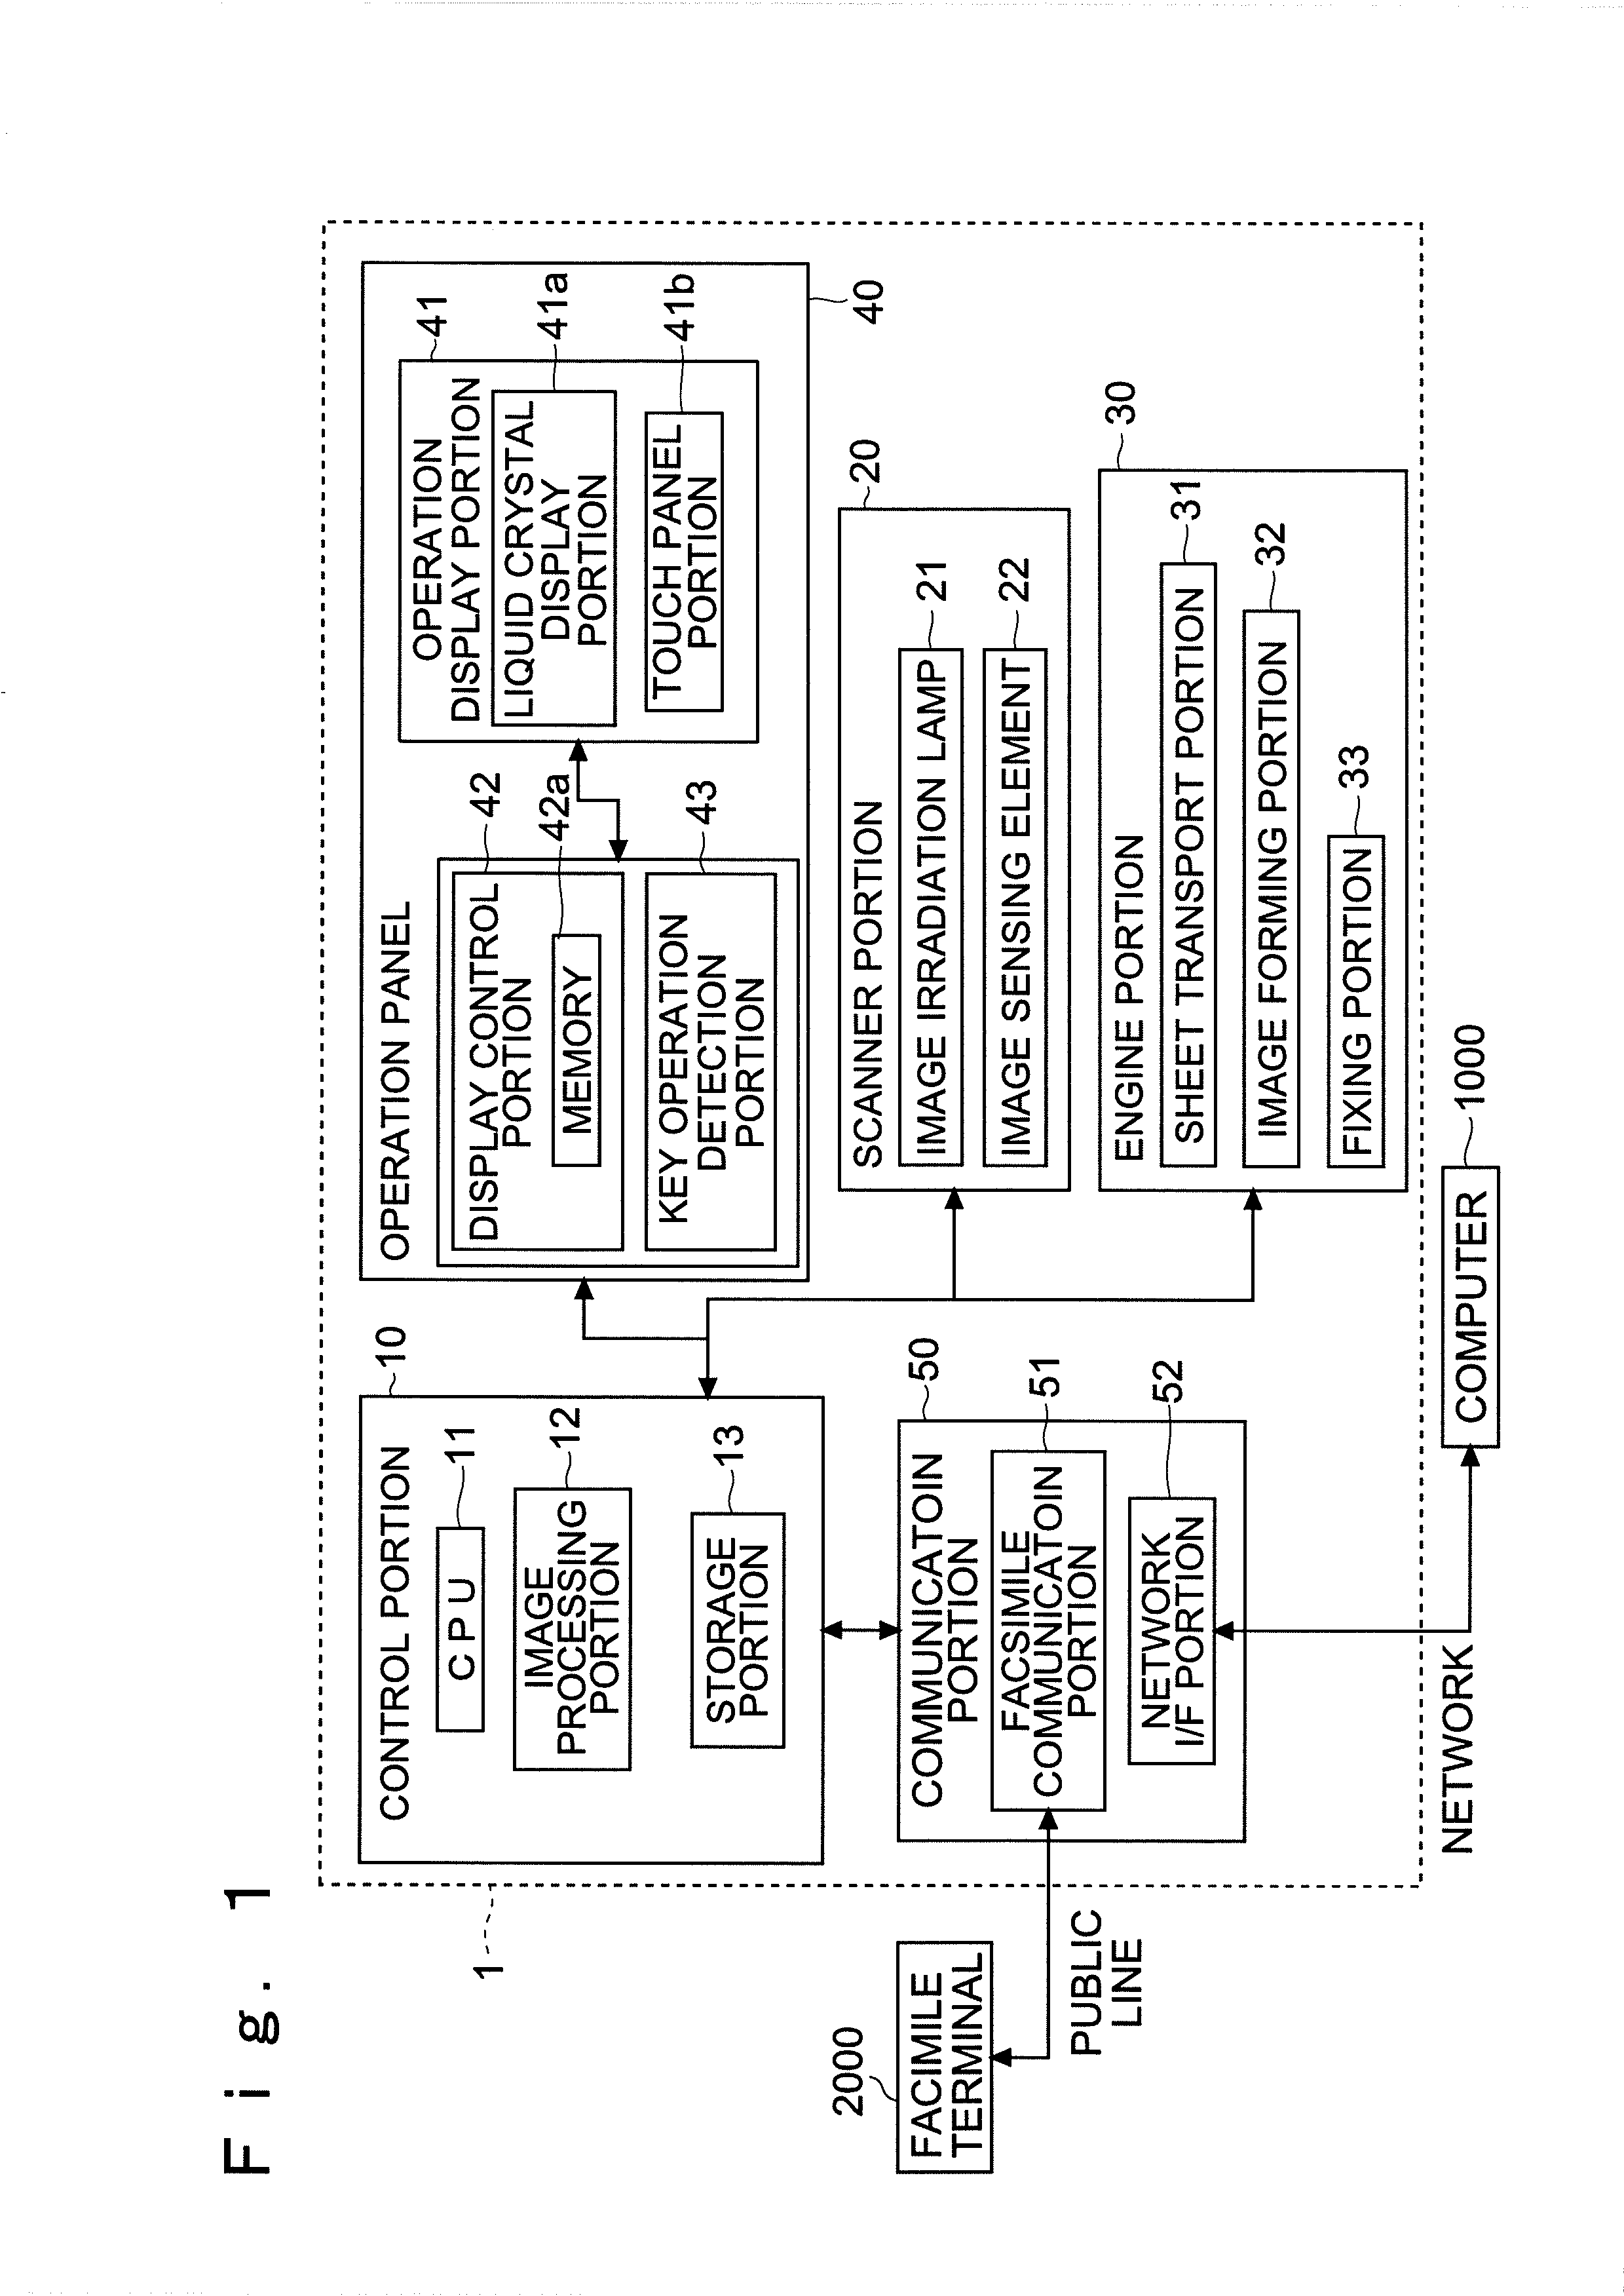 Image forming apparatus and display method using operation display portion thereof